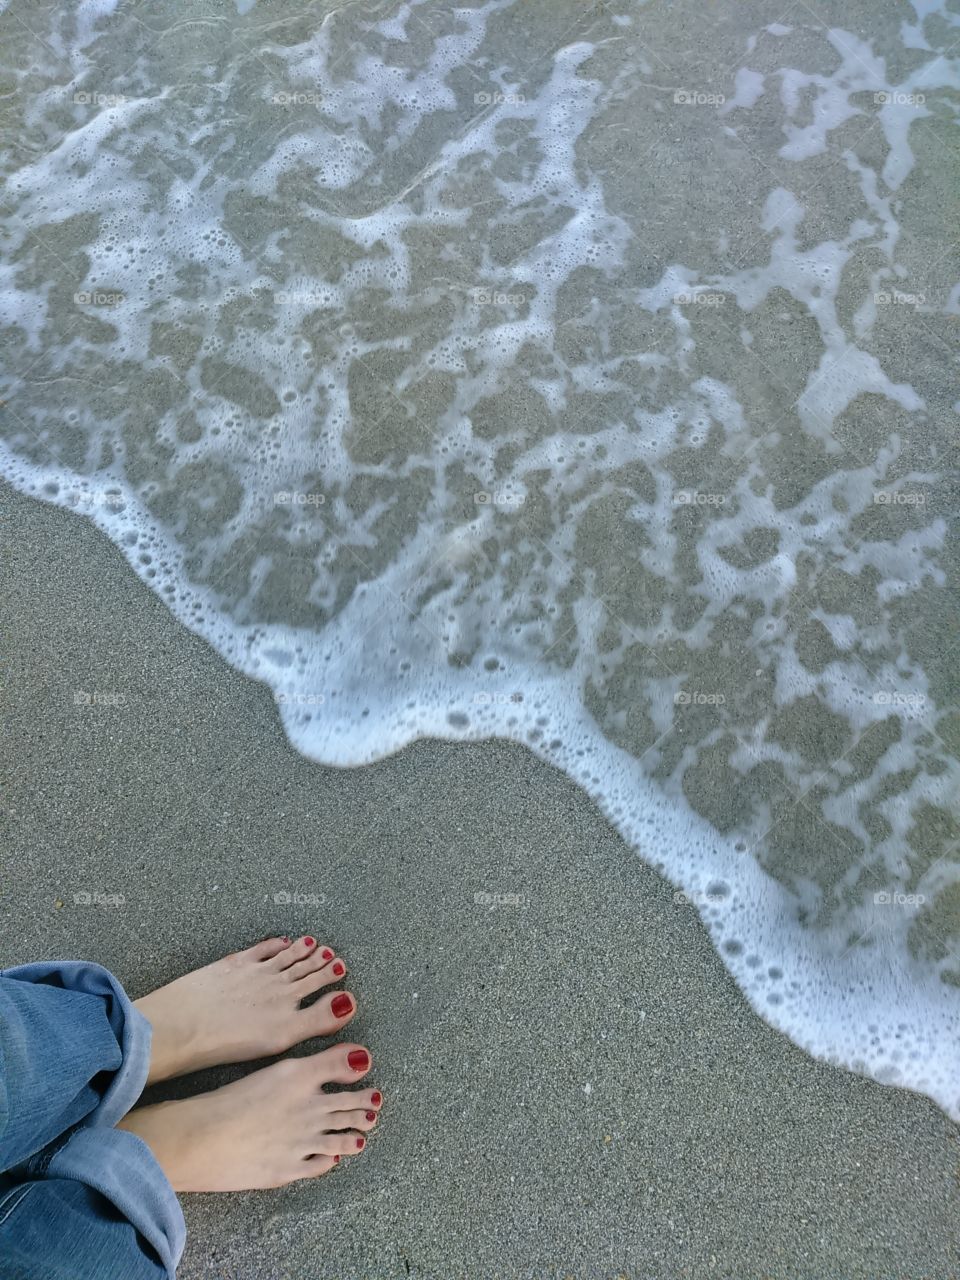 Feet with Red toe nails on sand beach with white froth wave